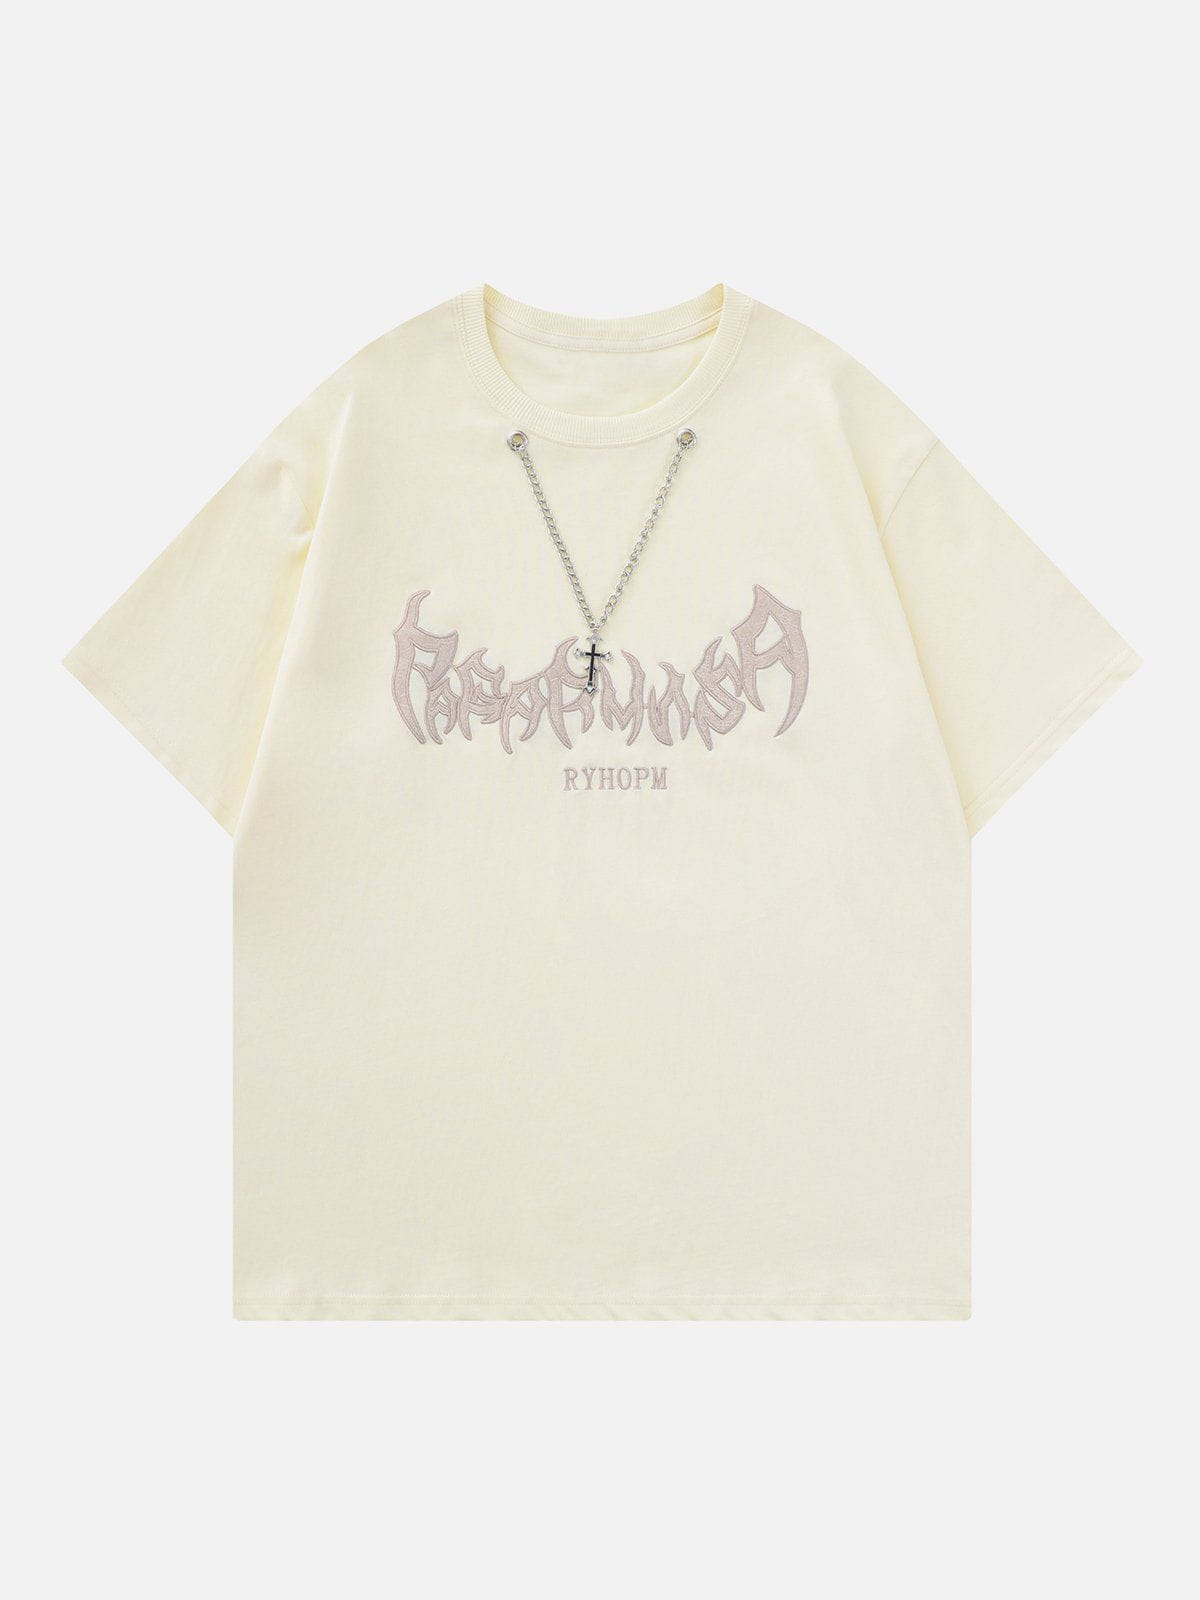 Sneakerland™ - Embroidery Chain Decoration Tee